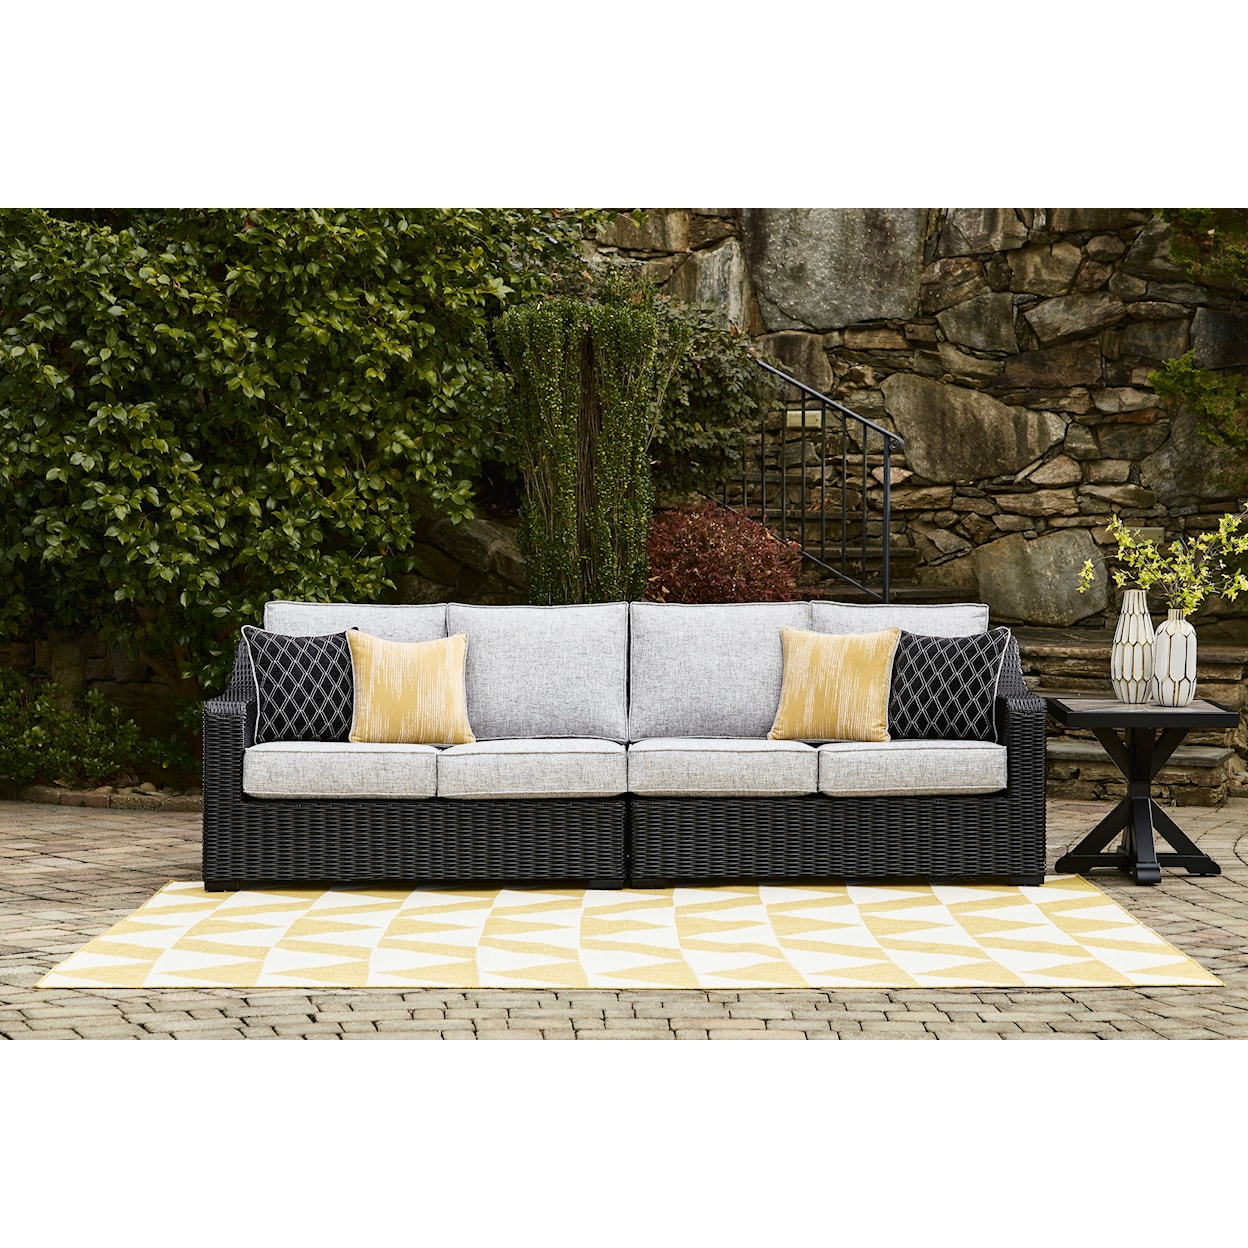 Signature Design by Ashley Beachcroft 2-Piece Outdoor Loveseat With Cushion